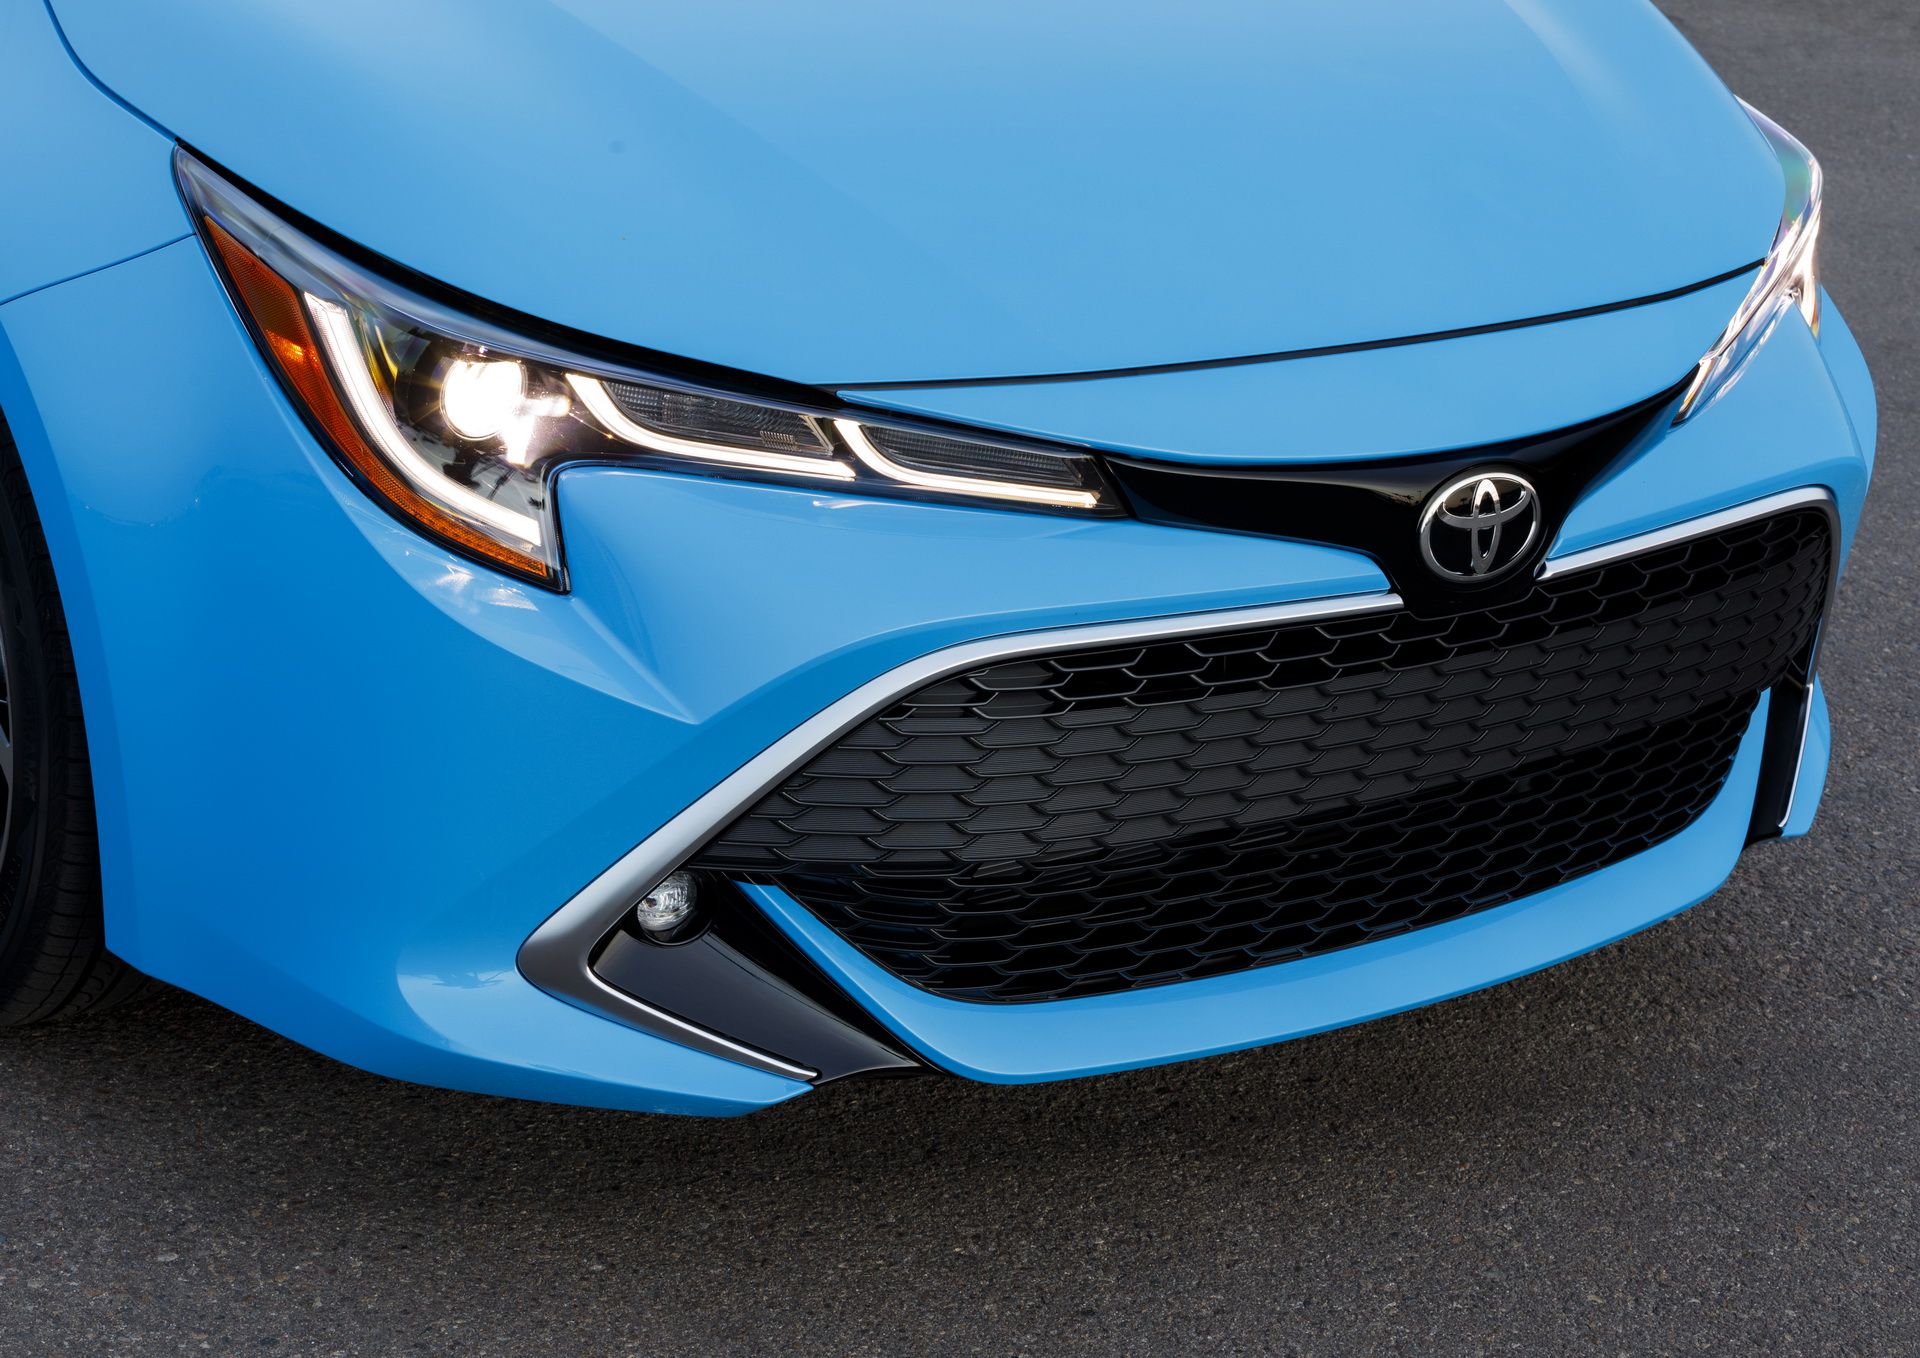 New Toyota Auris Crosses The Pond, Becomes North America's 2019